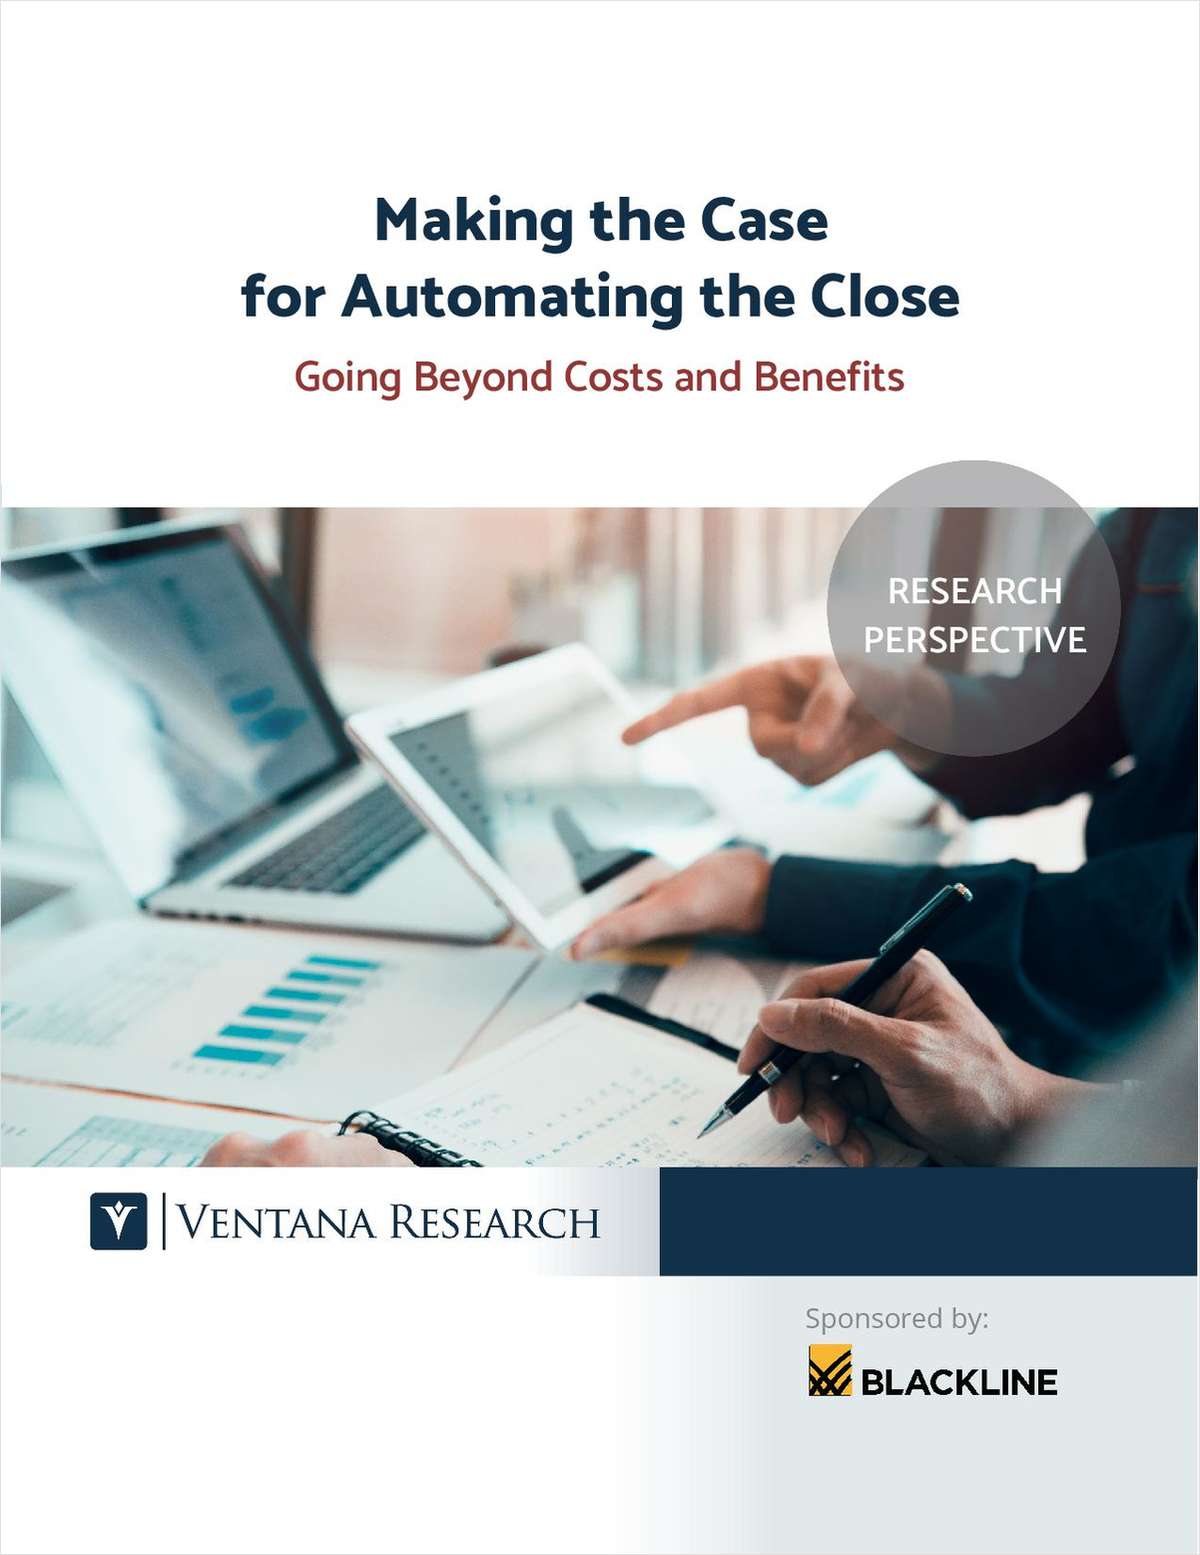 Ventana Research: Making the Case for Automating the Close